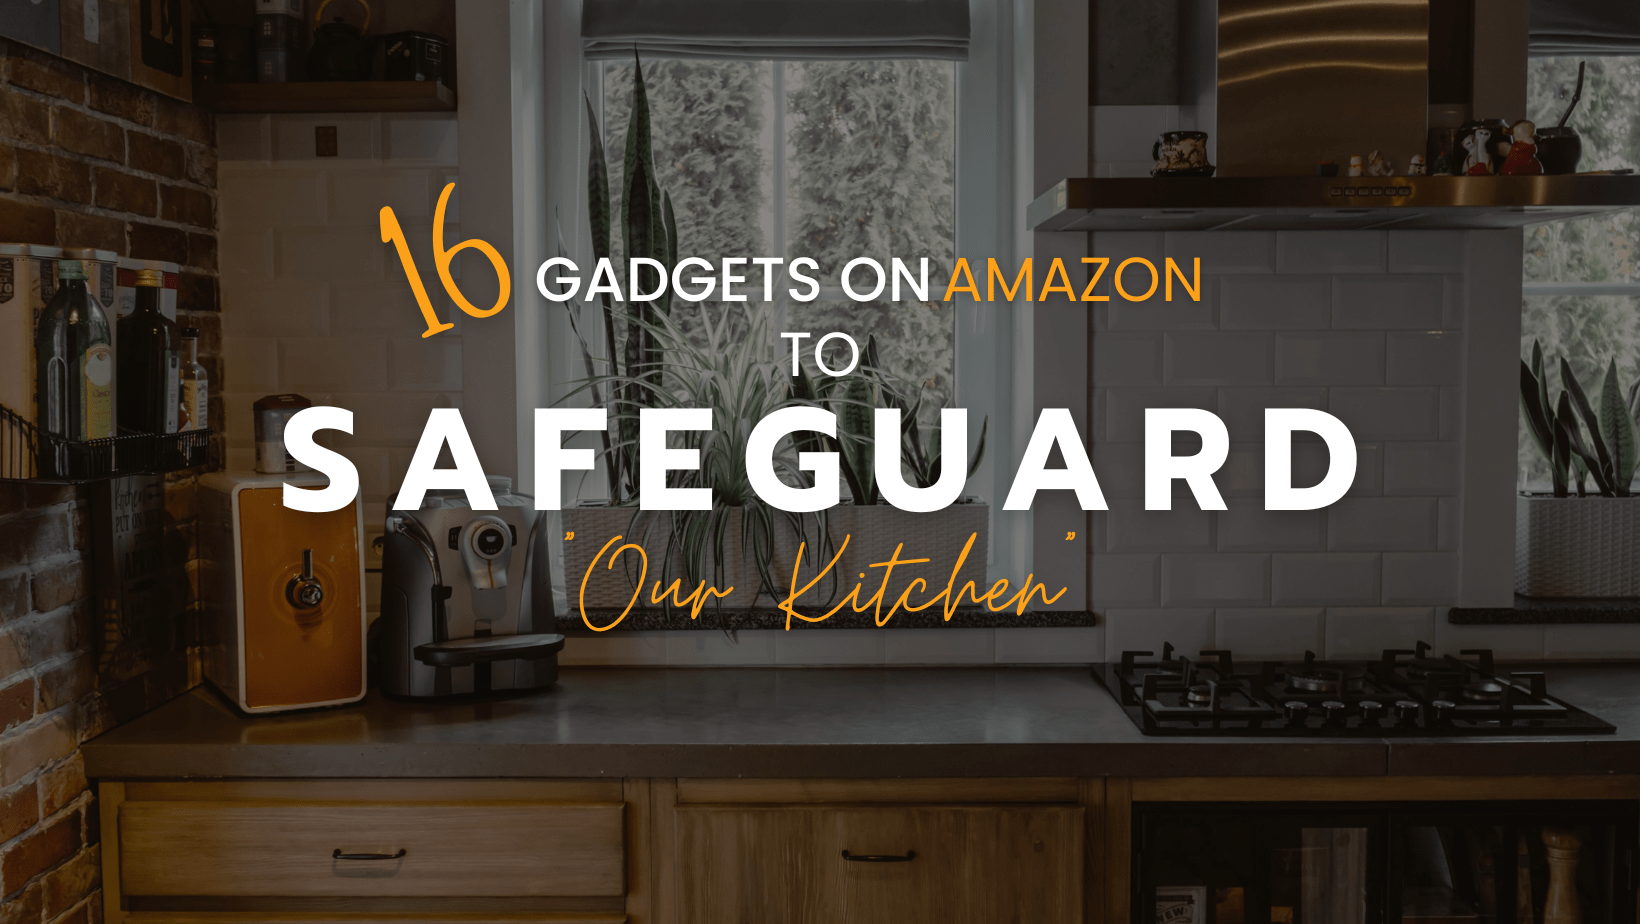 16 gadgets to safeguard kitchen